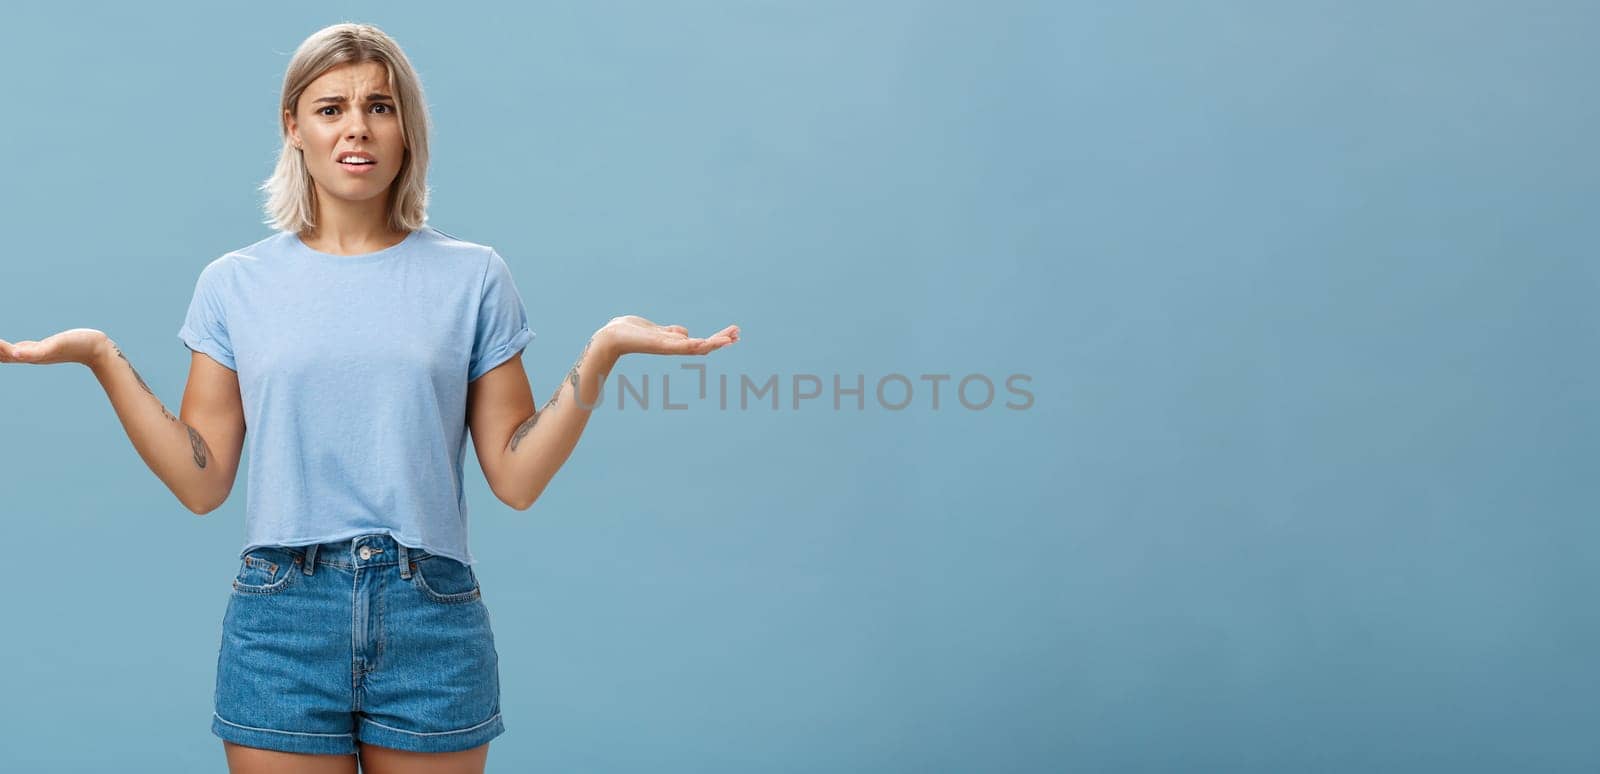 Girl feeling struggles to understand what happening. Confused perplexed intense good-looking female with fair hair shrugging with hands spread aside in displeased clueless pose posing over blue wall.